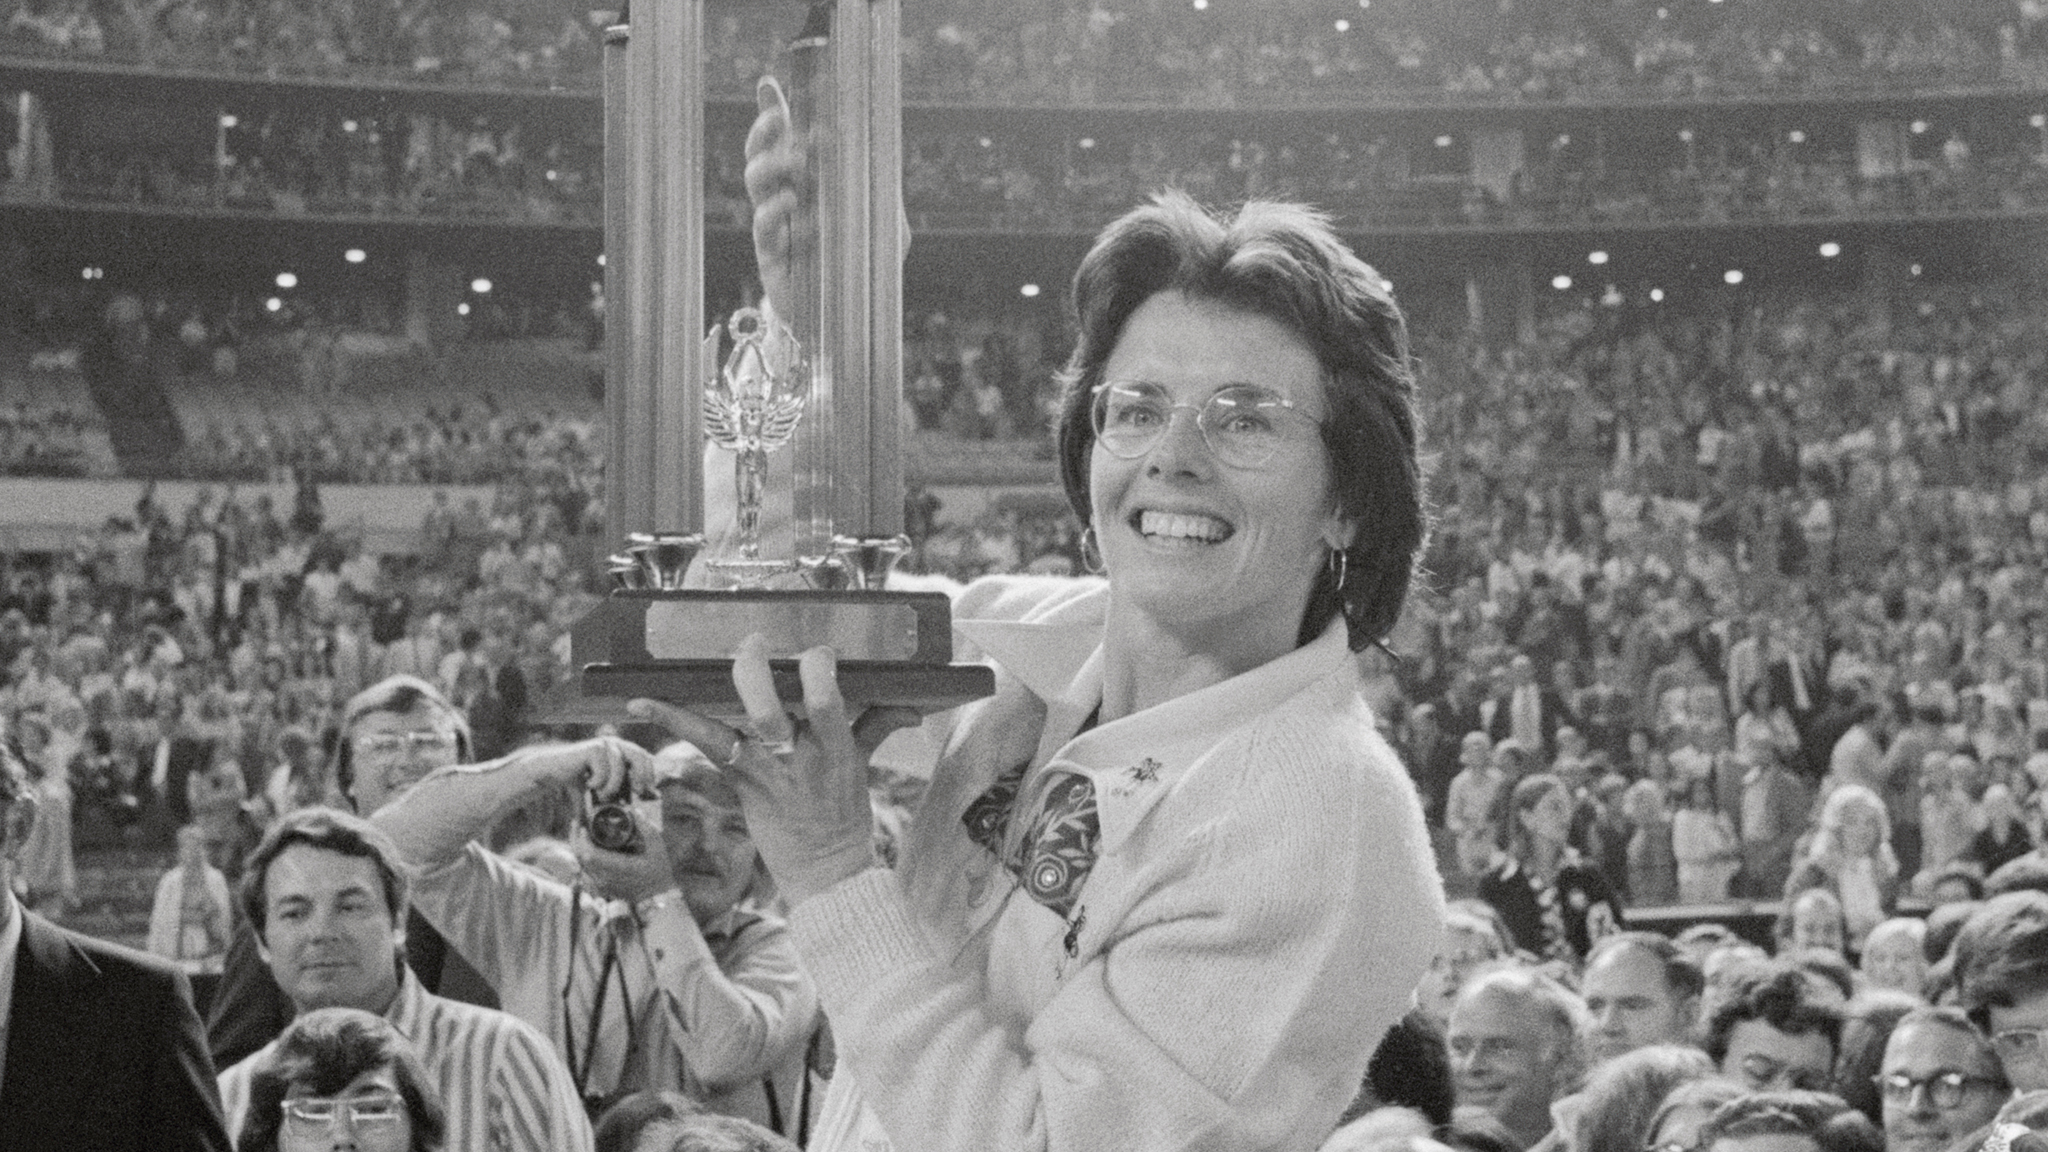 September 20, 1973: Billie Jean King Defeated Bobby Riggs in the “Battle of the Sexes” Tennis Match